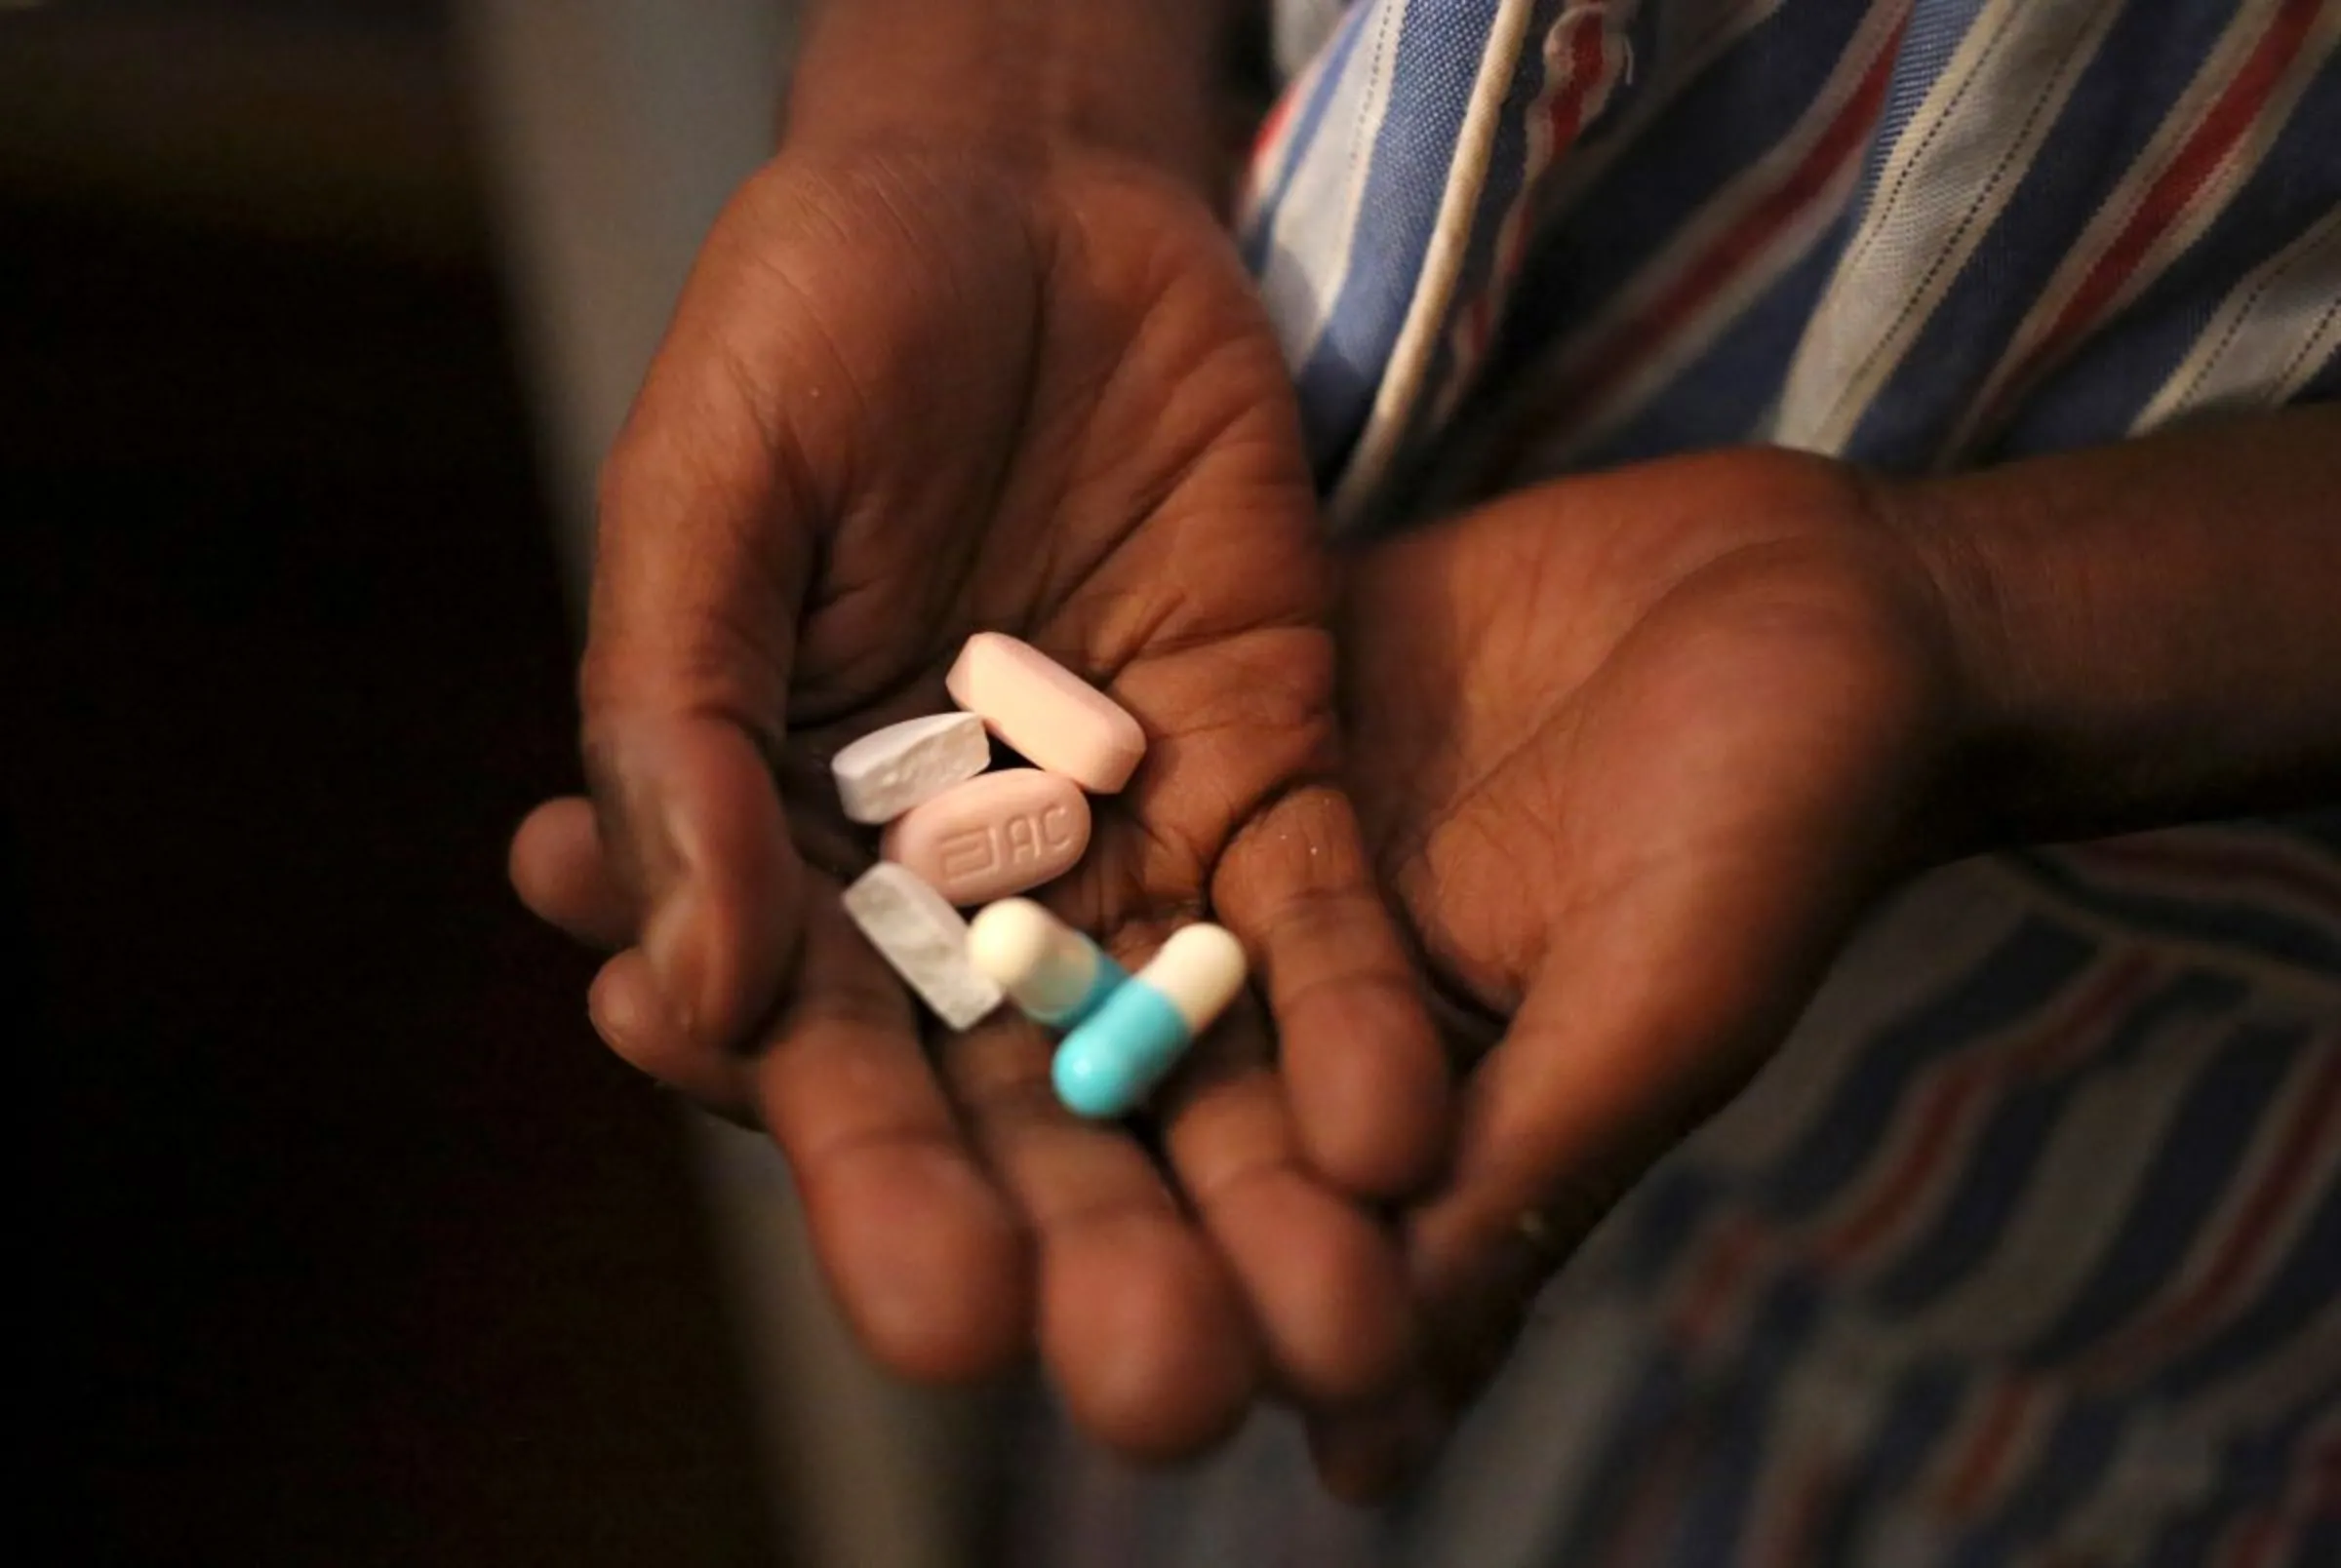 Nine-year-old Tumelo shows off antiretroviral (ARV) pills before taking his medication at Nkosi's Haven, south of Johannesburg November 28, 2014. REUTERS/Siphiwe Sibeko